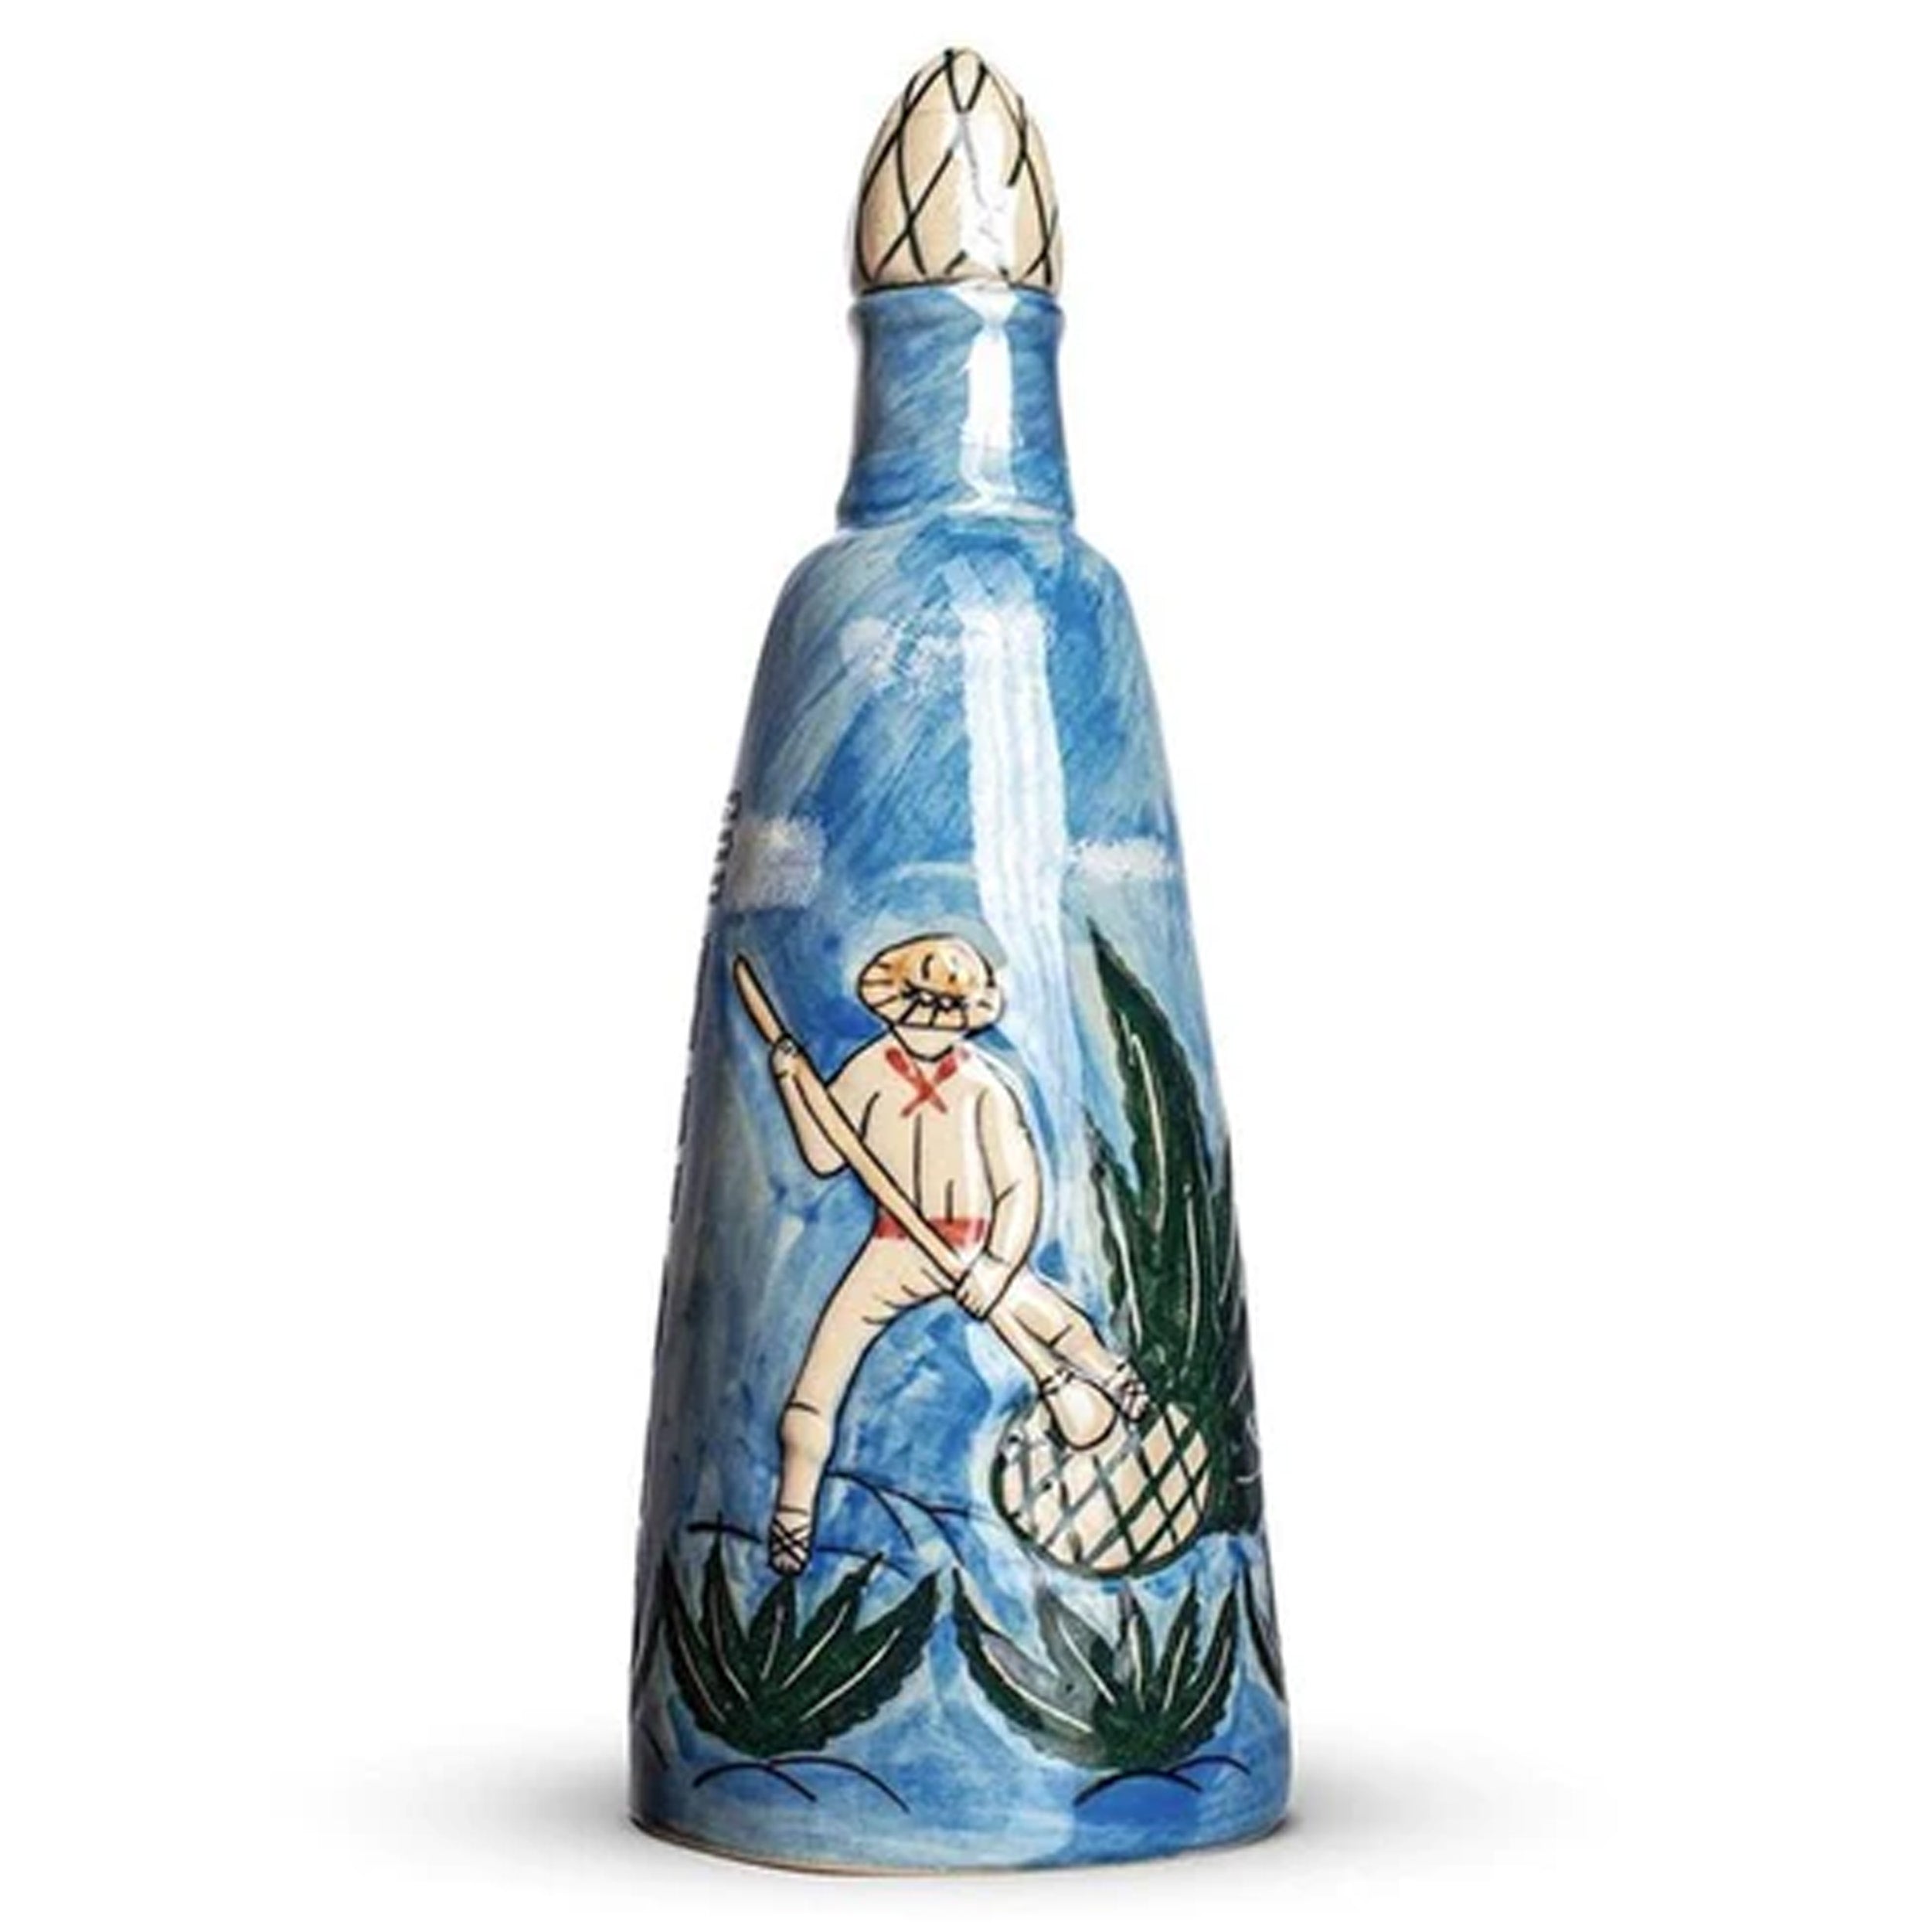 God Enoc Extra Anejo Tequila Limited Edition Ceramic